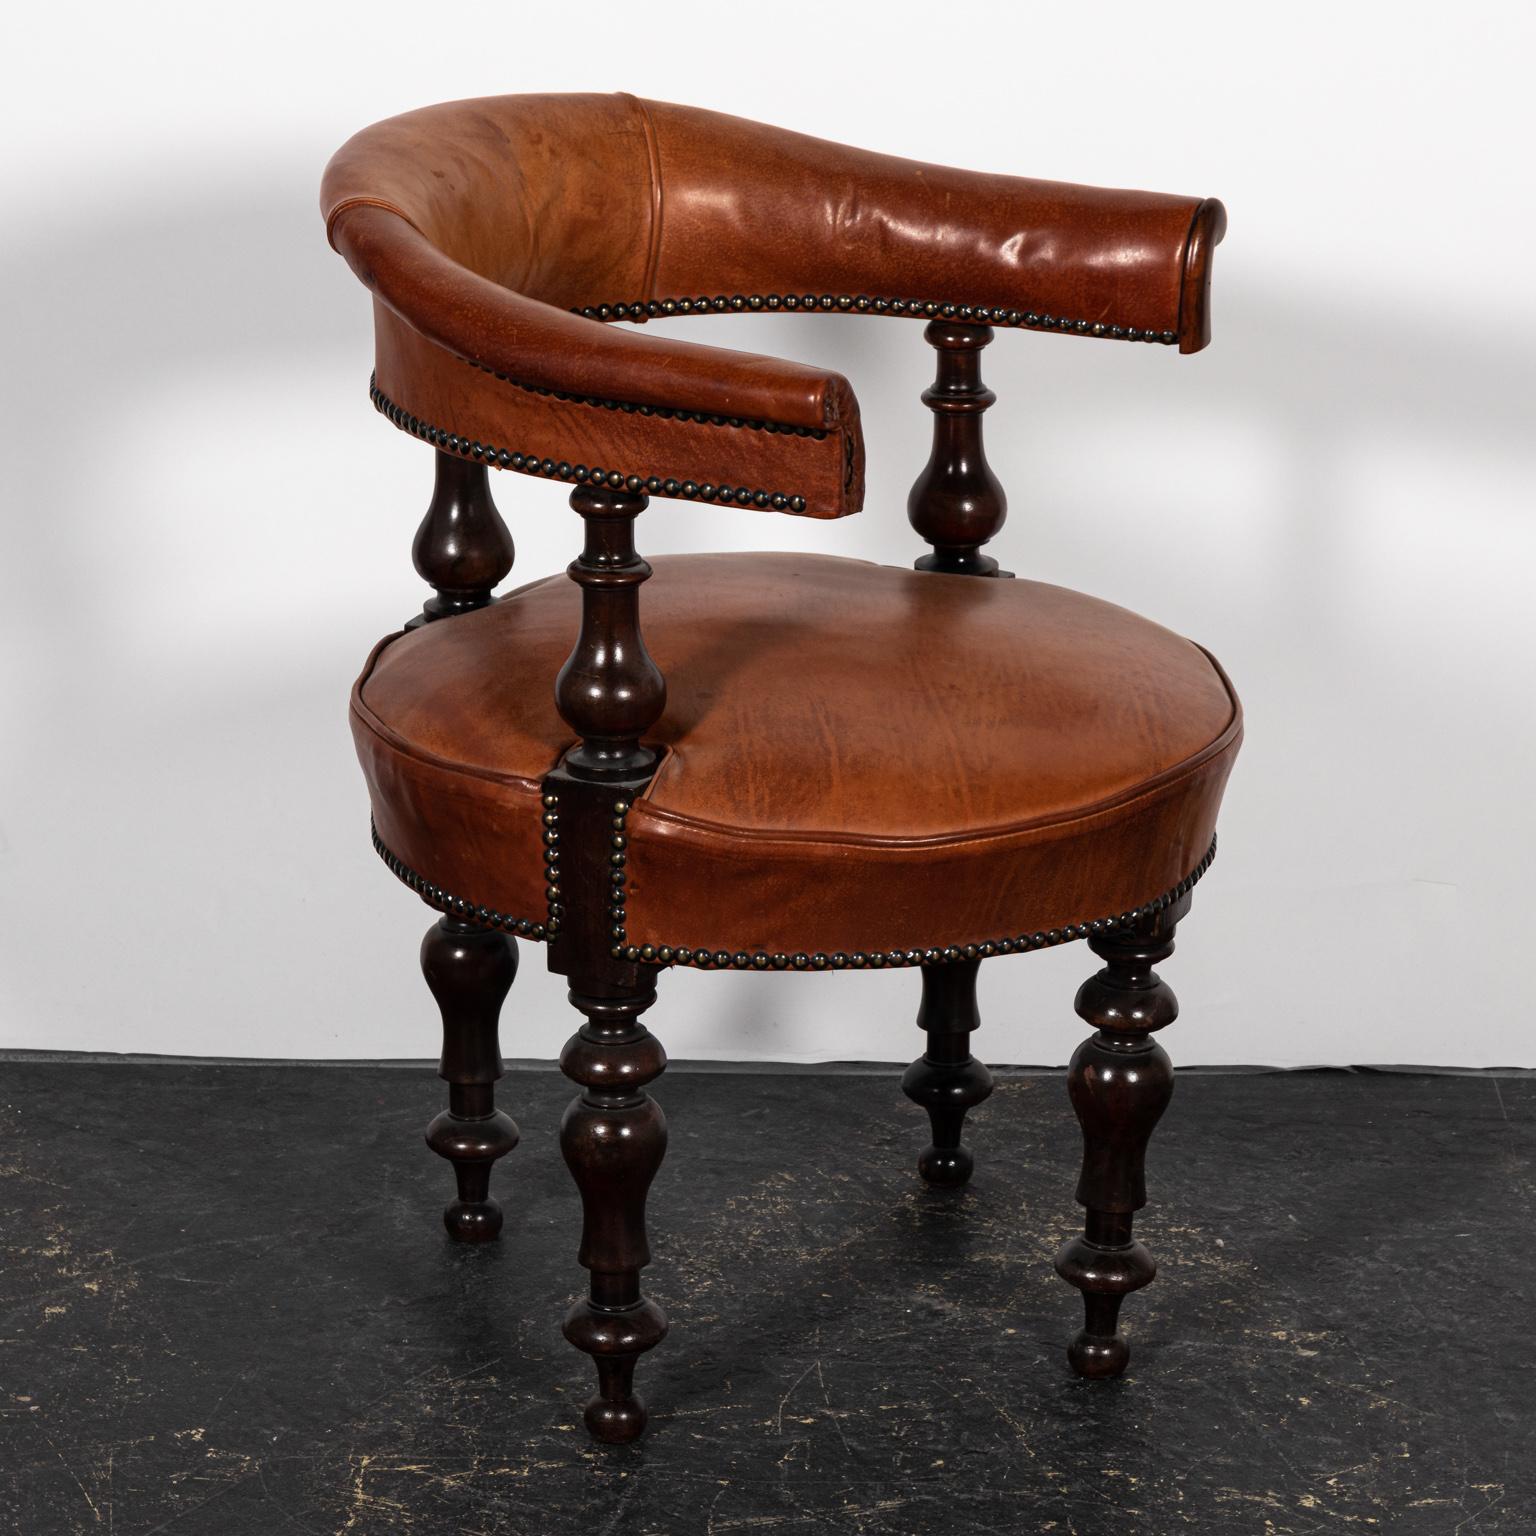 English leather upholstered desk chair with metal nail head trim and vase turned legs, circa 19th century. Please note of wear consistent with age including stains and finish loss to the leather.